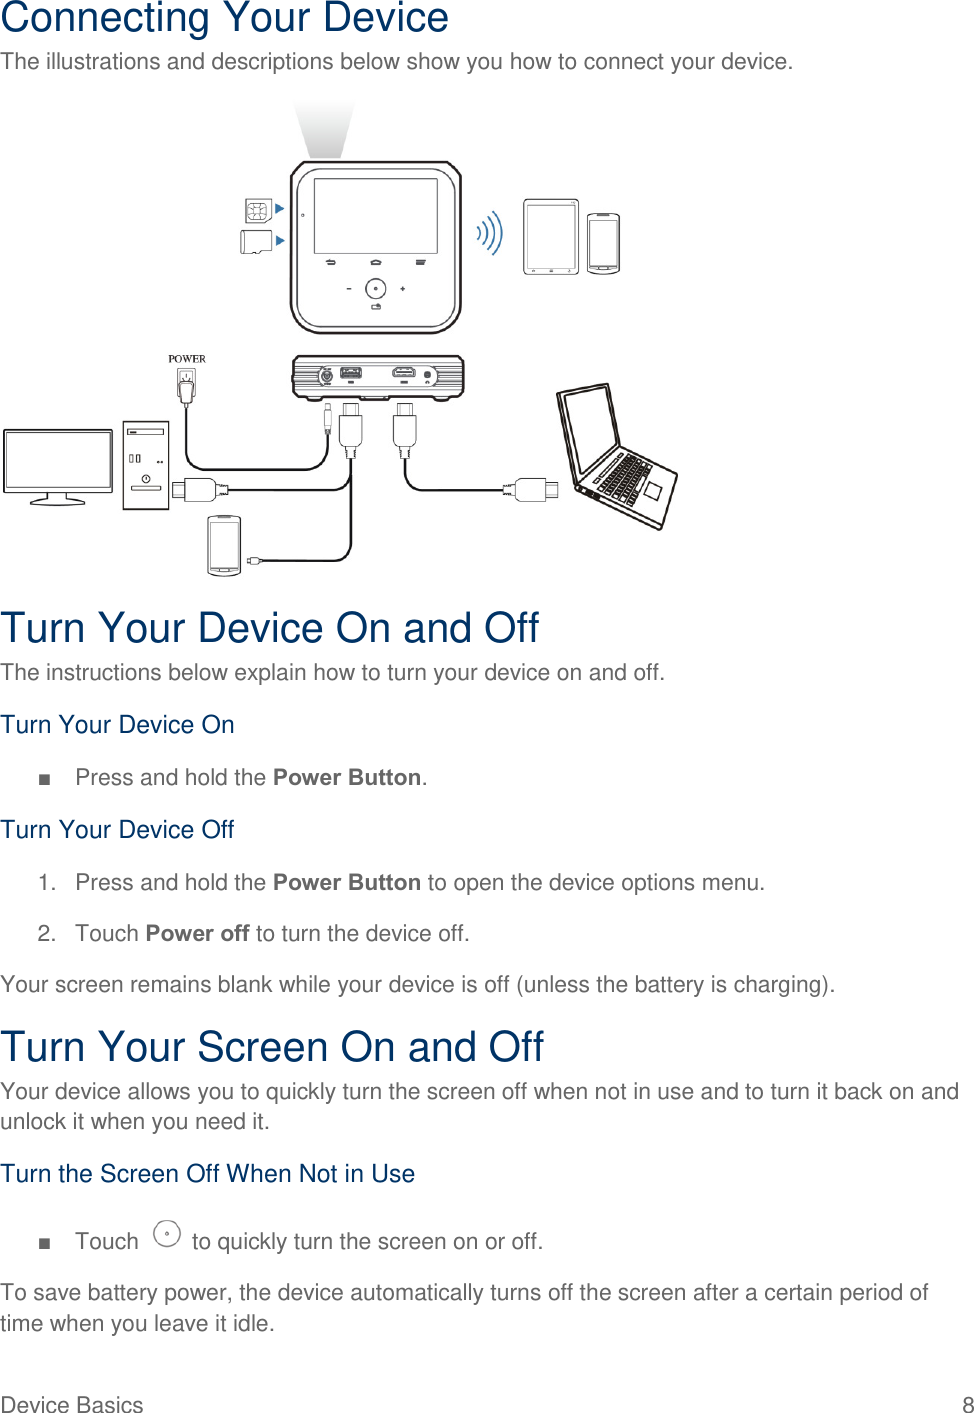  Device Basics  8 Connecting Your Device The illustrations and descriptions below show you how to connect your device.  Turn Your Device On and Off The instructions below explain how to turn your device on and off. Turn Your Device On ■  Press and hold the Power Button. Turn Your Device Off 1.  Press and hold the Power Button to open the device options menu.  2.  Touch Power off to turn the device off. Your screen remains blank while your device is off (unless the battery is charging). Turn Your Screen On and Off Your device allows you to quickly turn the screen off when not in use and to turn it back on and unlock it when you need it. Turn the Screen Off When Not in Use ■  Touch   to quickly turn the screen on or off. To save battery power, the device automatically turns off the screen after a certain period of time when you leave it idle. 